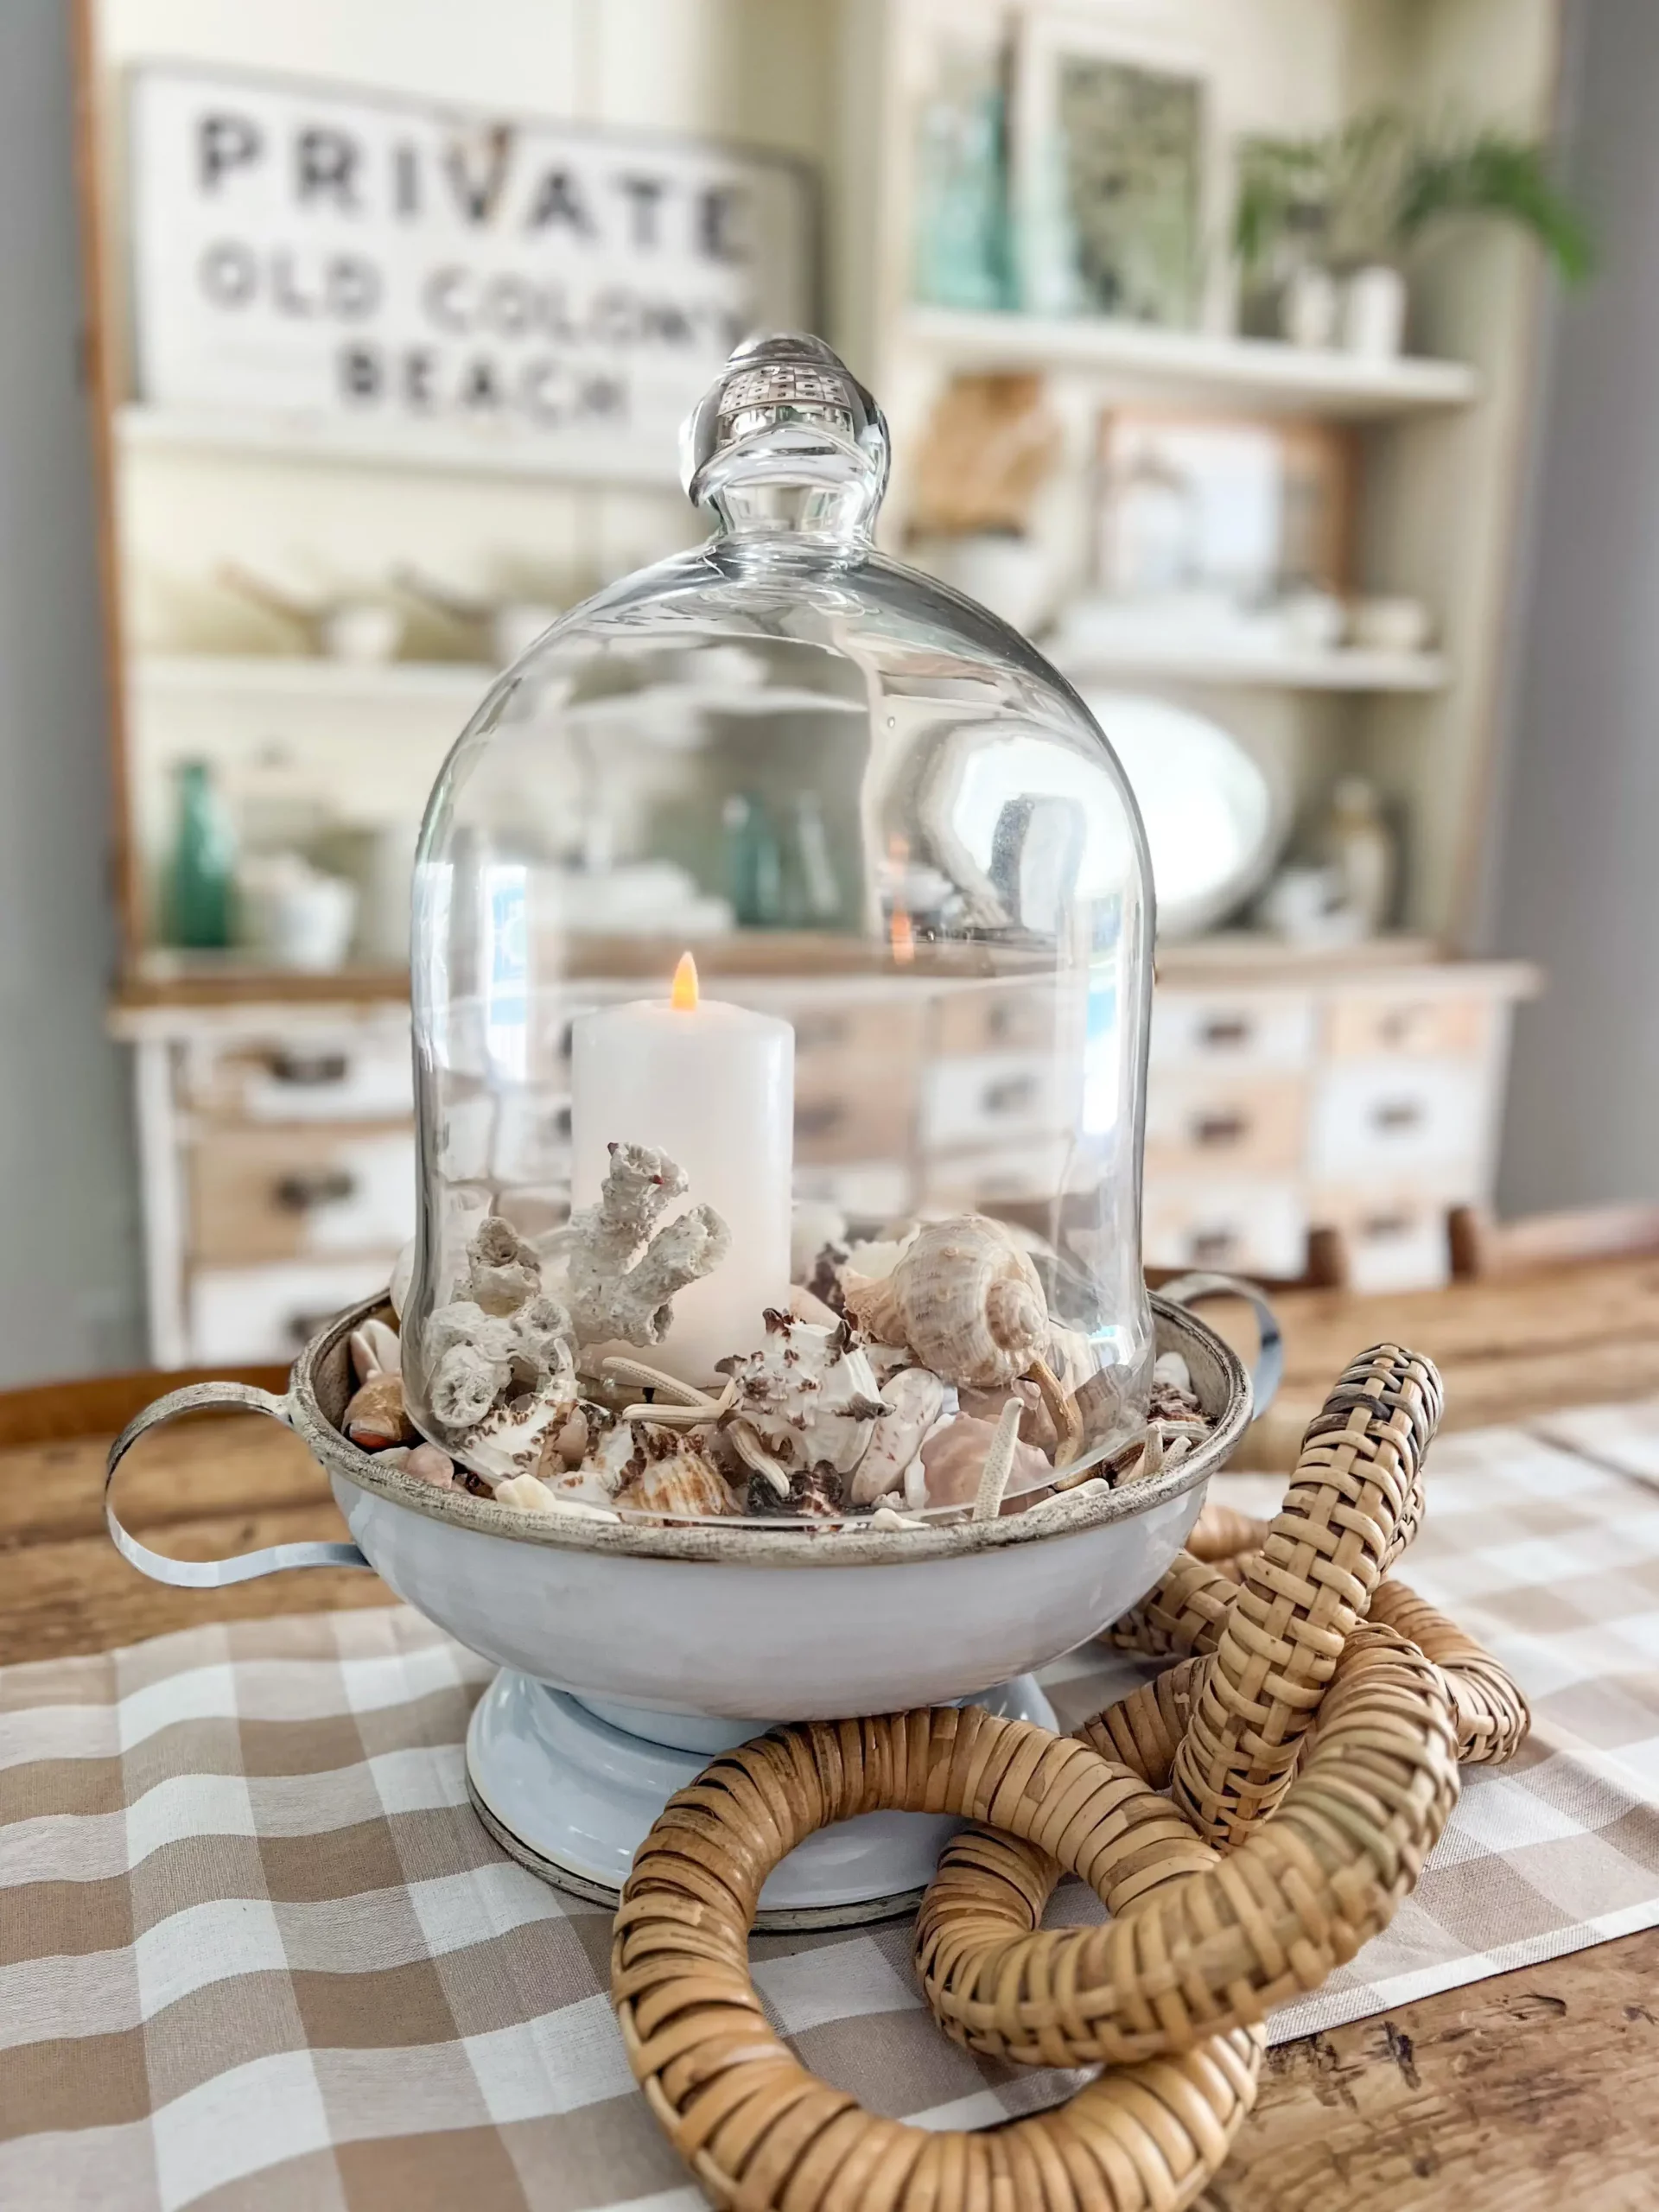 glass cloche over a bowl of small shells on a table